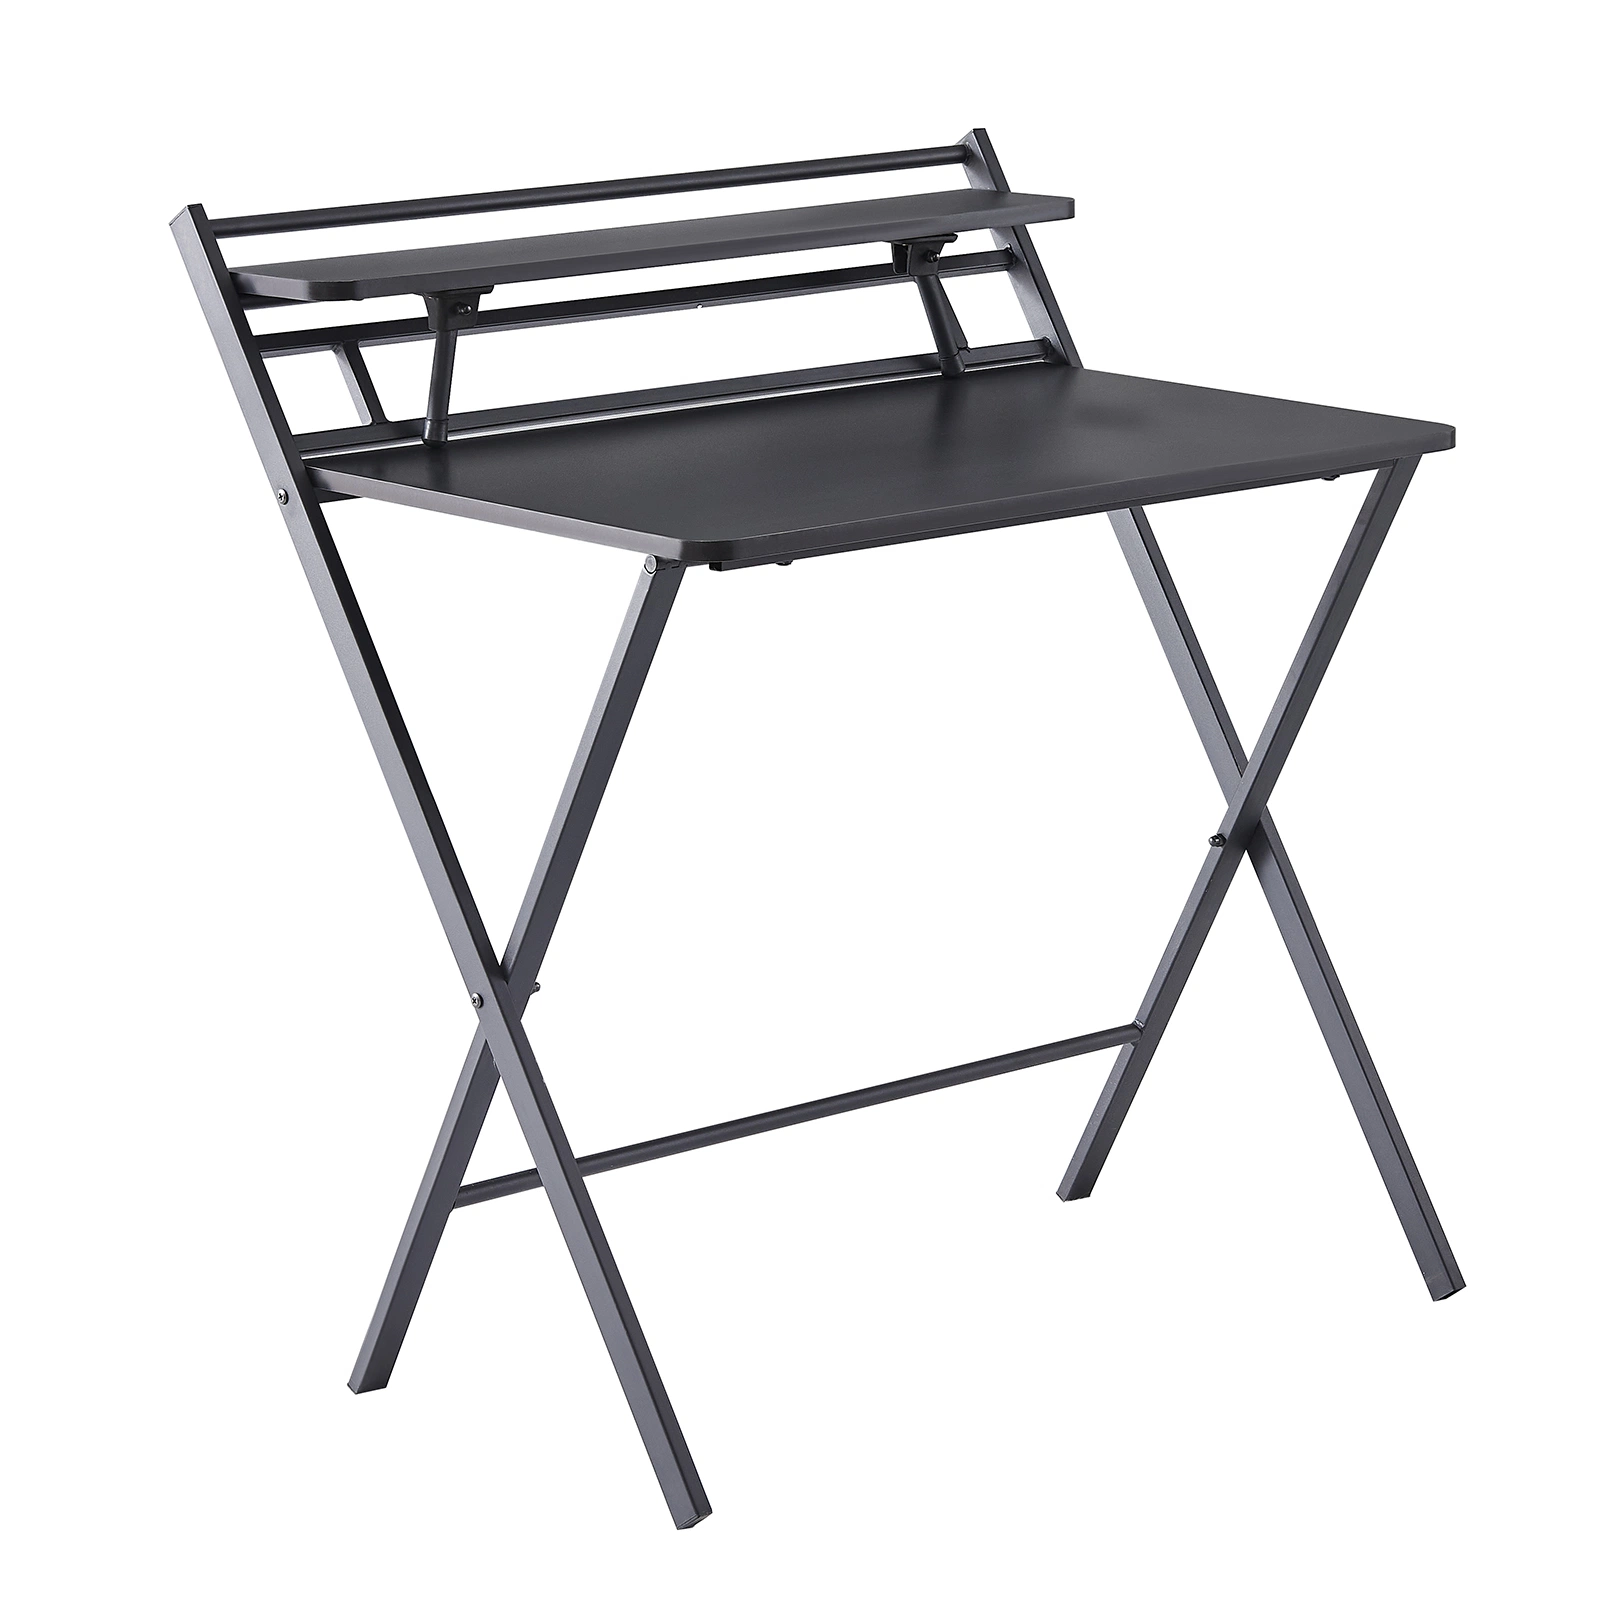 Folding 2 Tier Foldable Assembly Saves Space for Home Office Study, Metal Frames/Wood Top Laptop Table, Black Computer Desk Black Ws-Swf-Sk-CT12